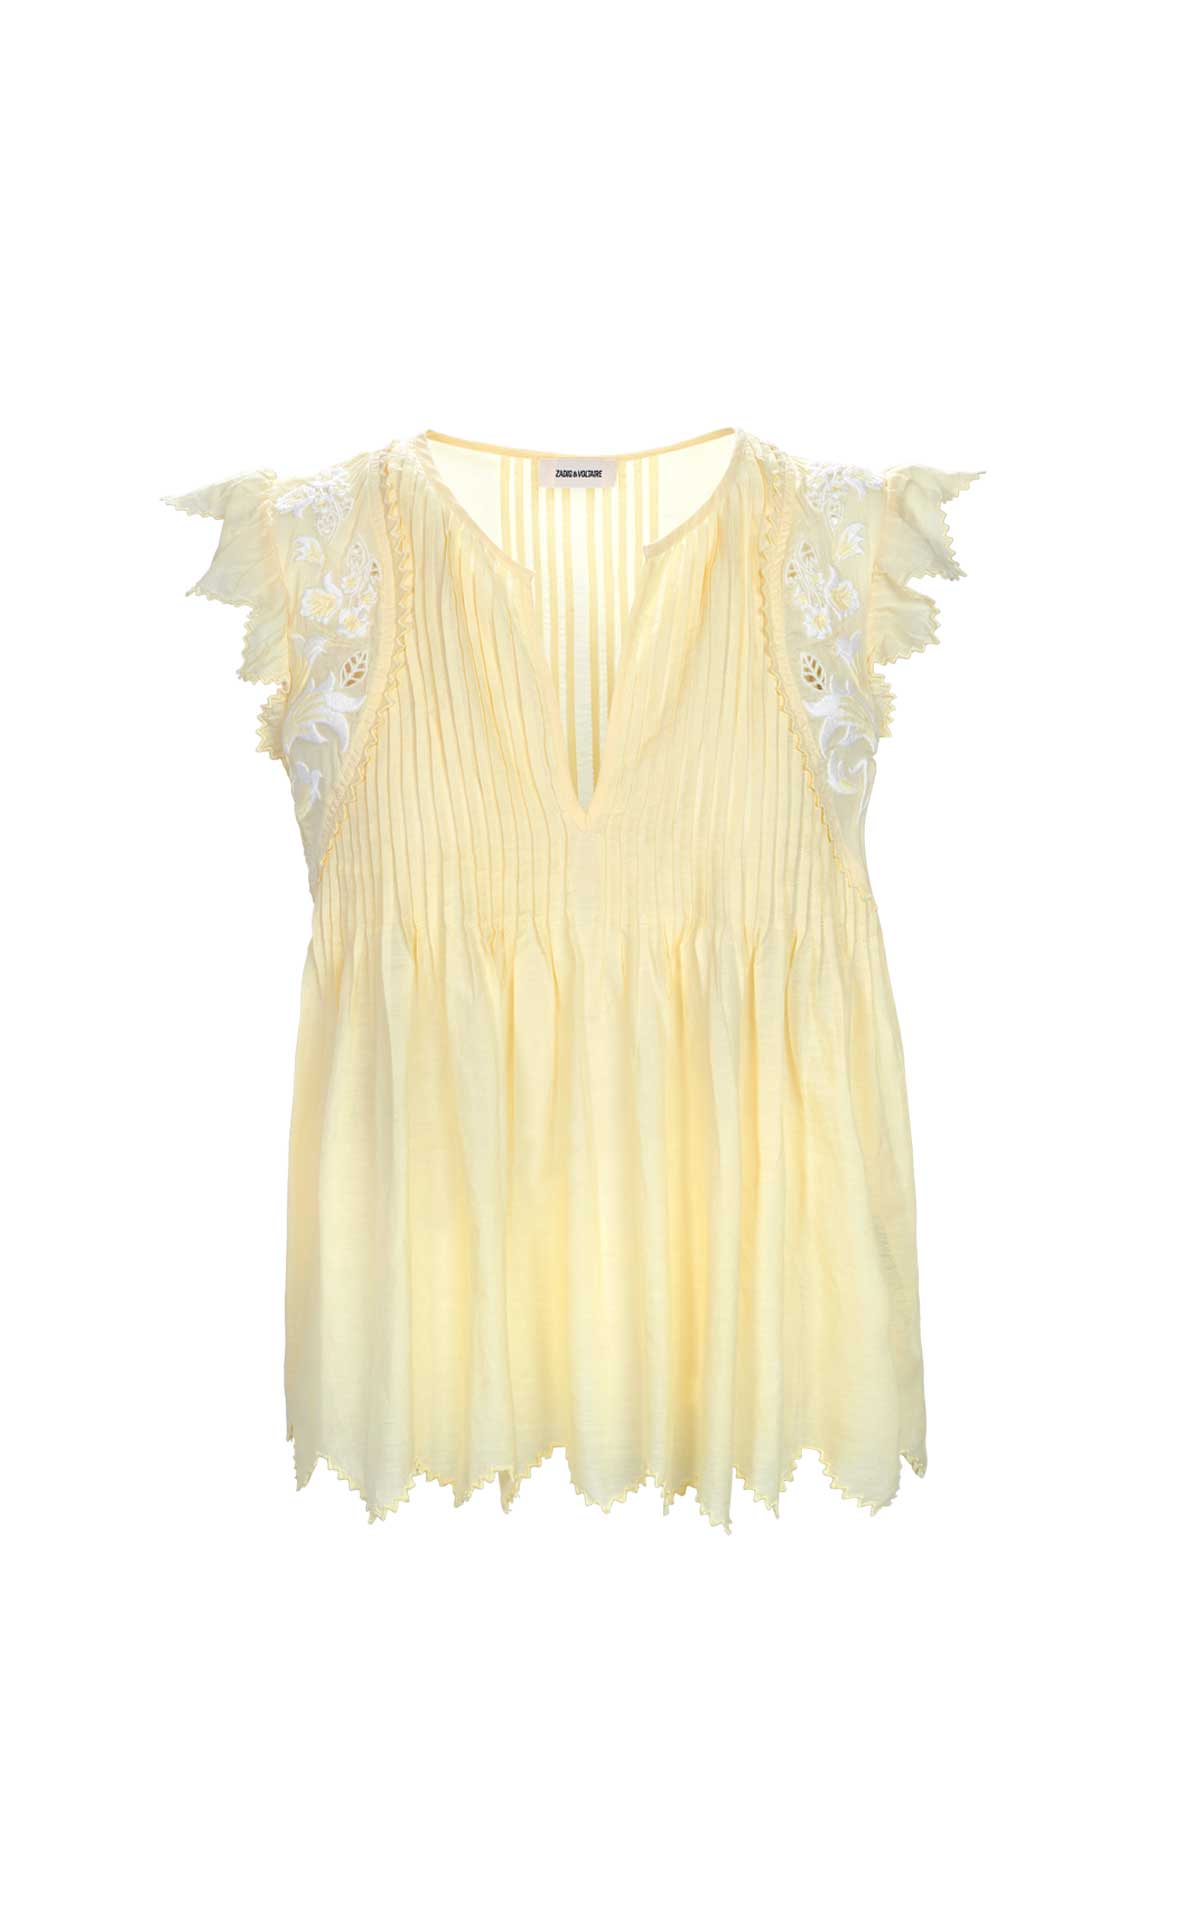 Peated yellow shirt Zadig & Voltaire